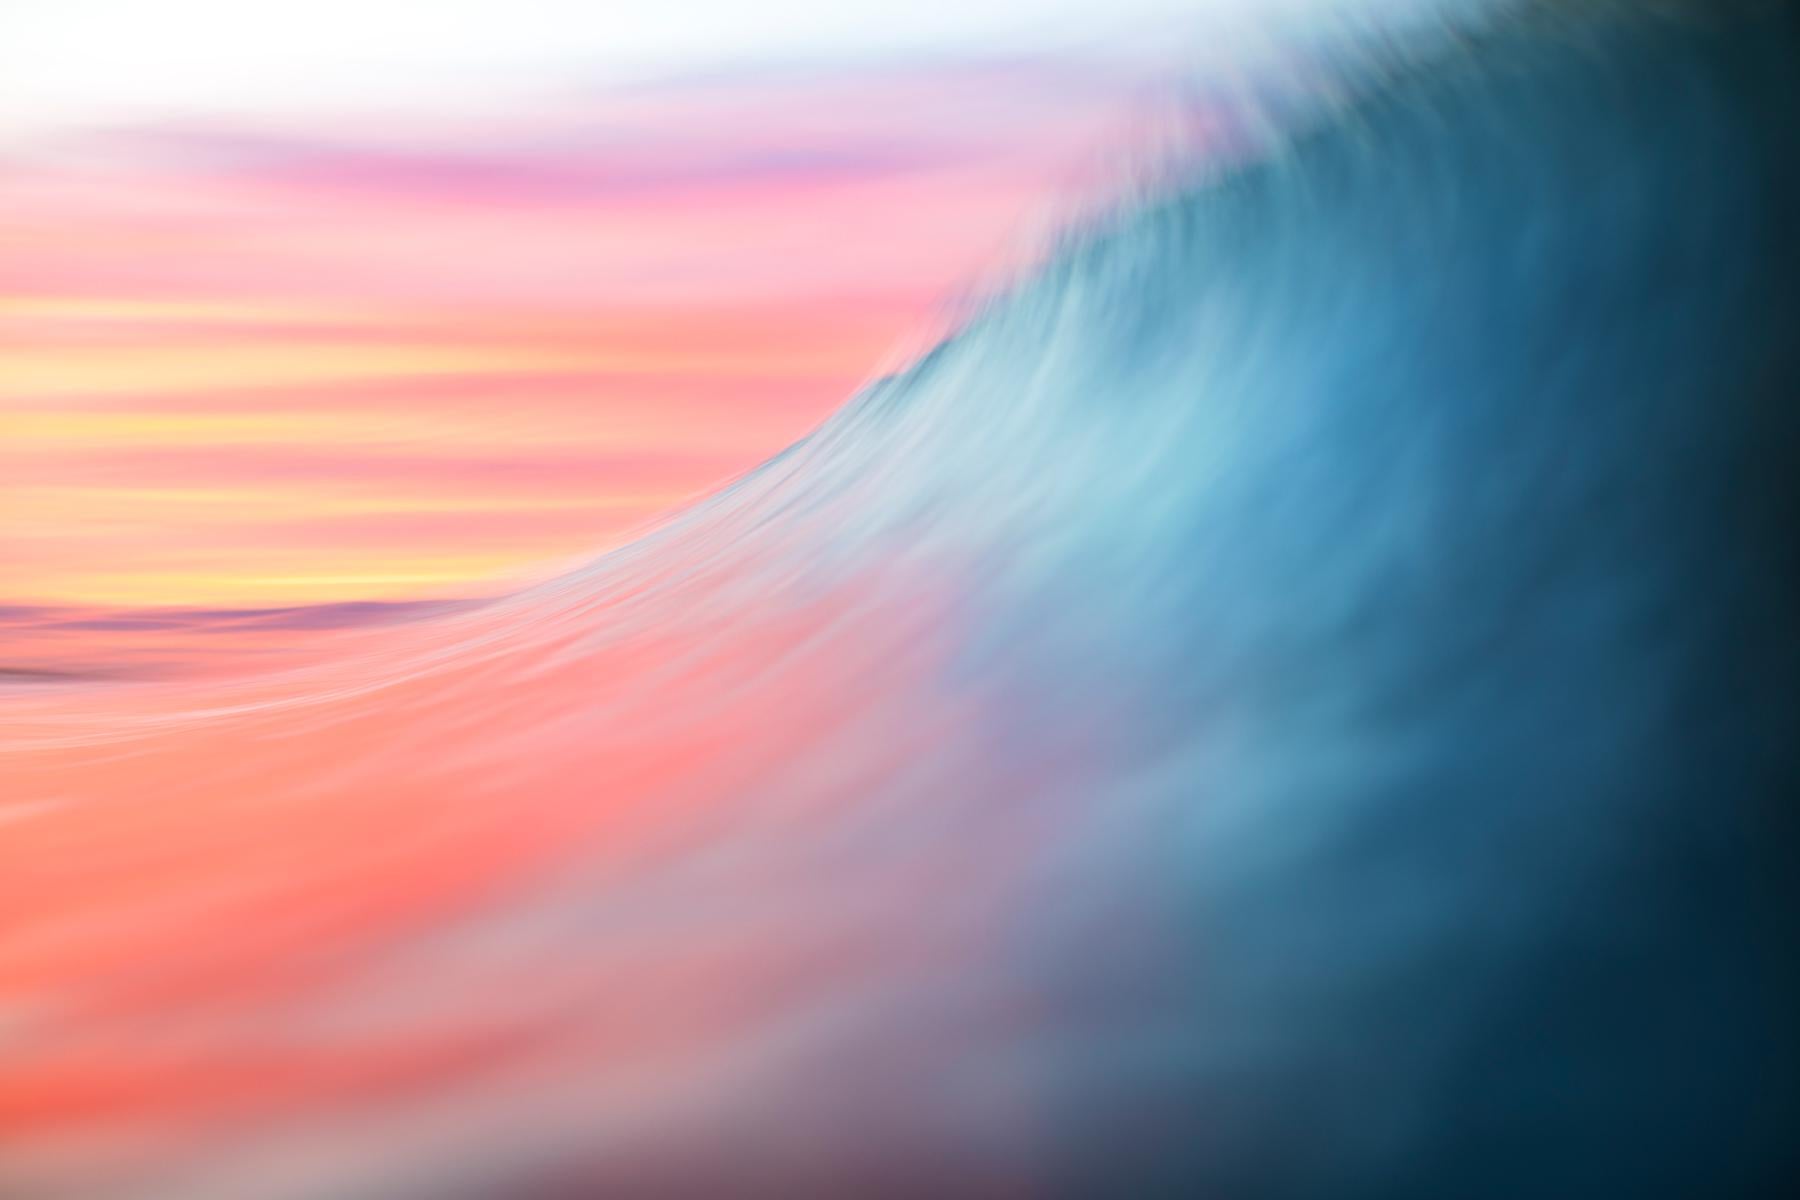 Danny Weiss Landscape Photograph - "Into the Deep" Abstract water photo in coral, rose, violet, blue (series 3, #2)